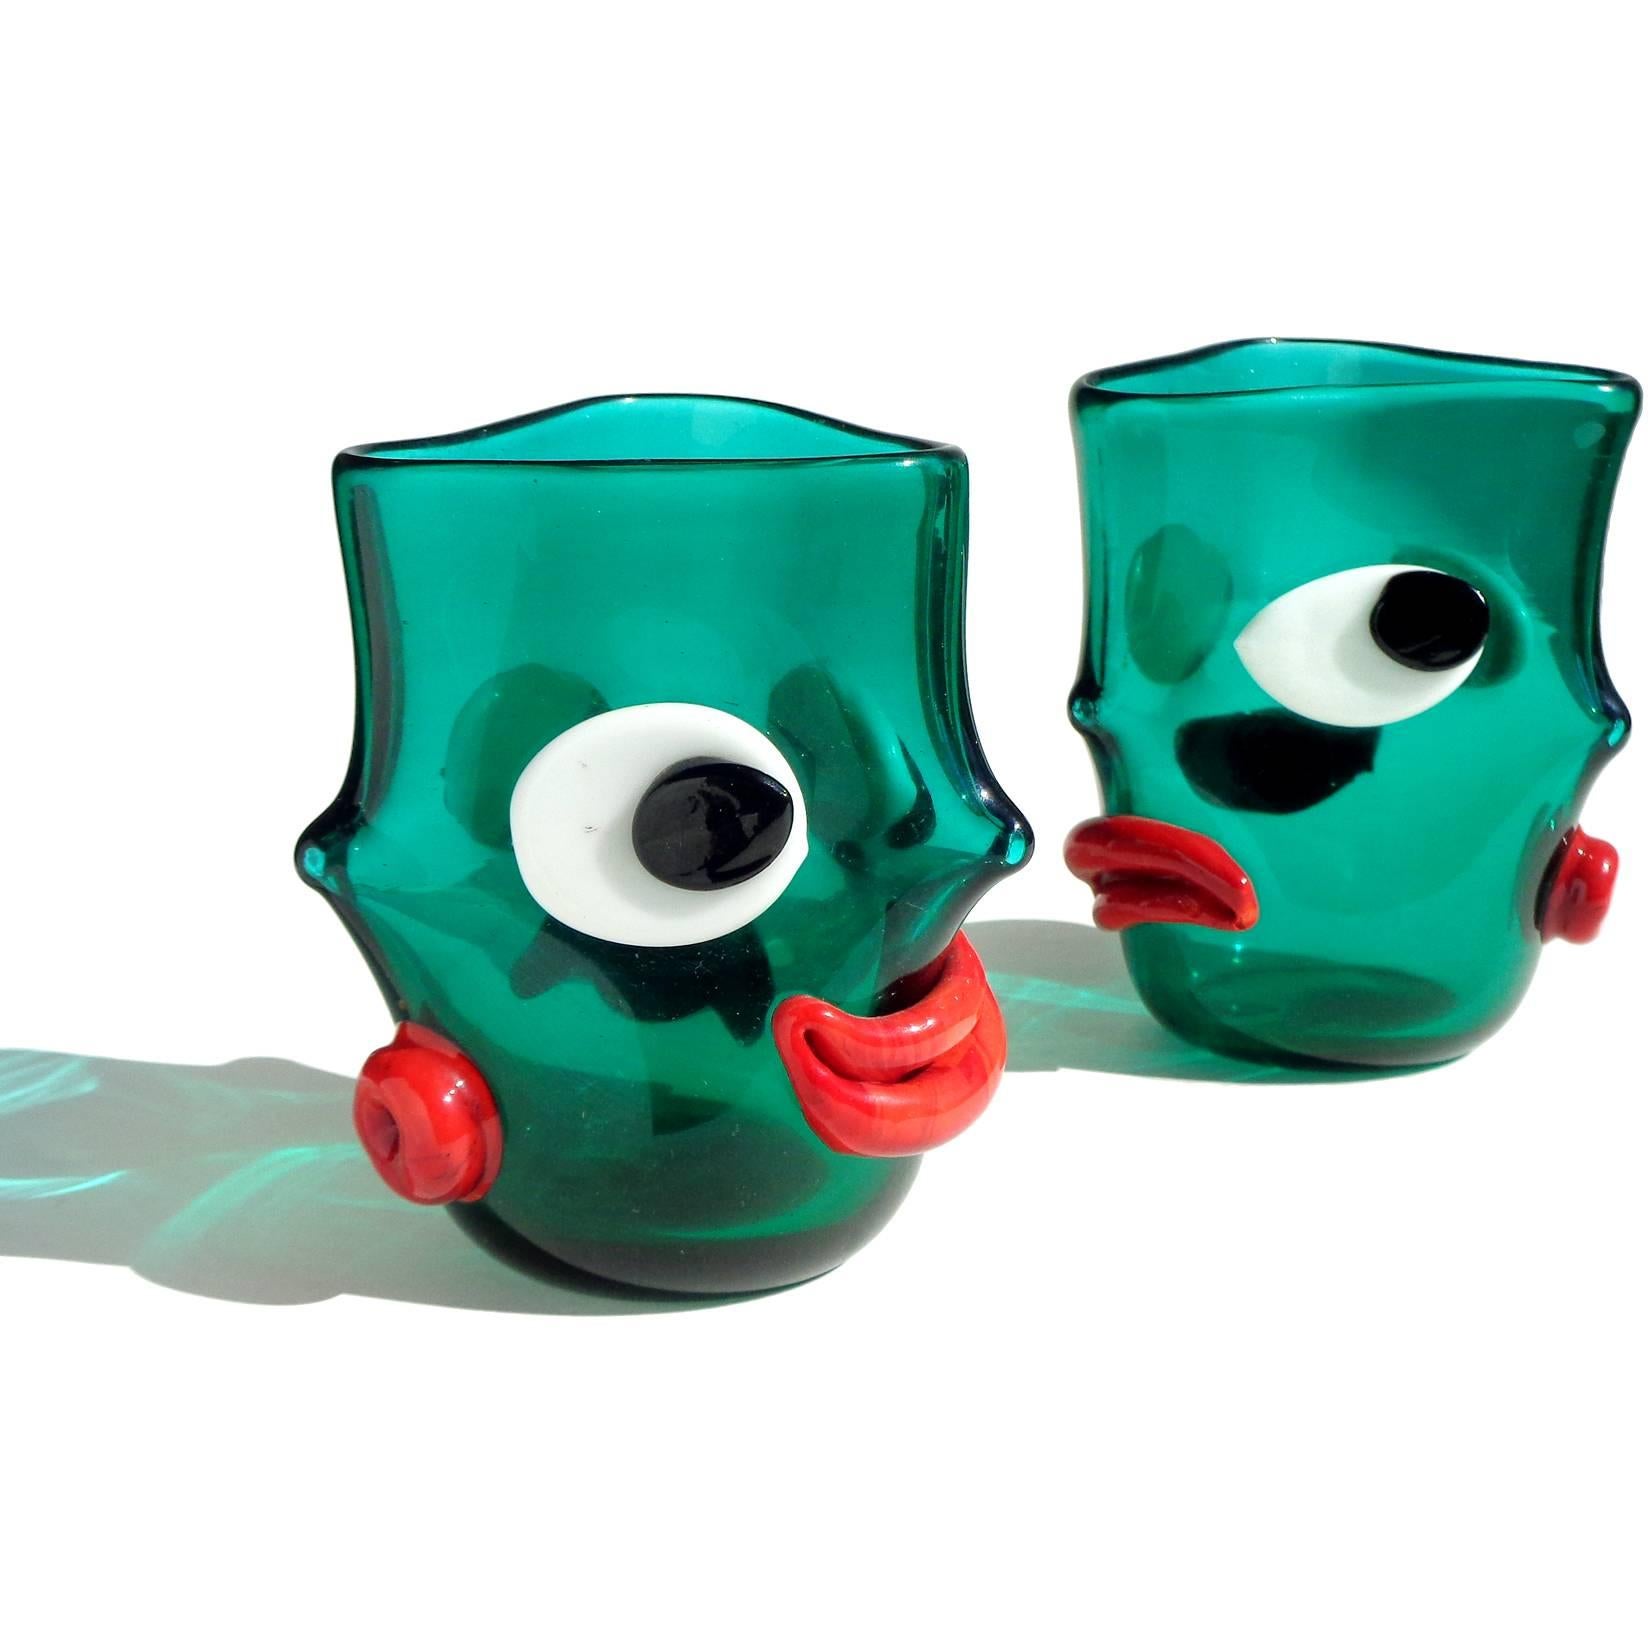 Free shipping worldwide! See details below description.

Rare pair of Murano handblown green with applied eyes and mouth art glass 